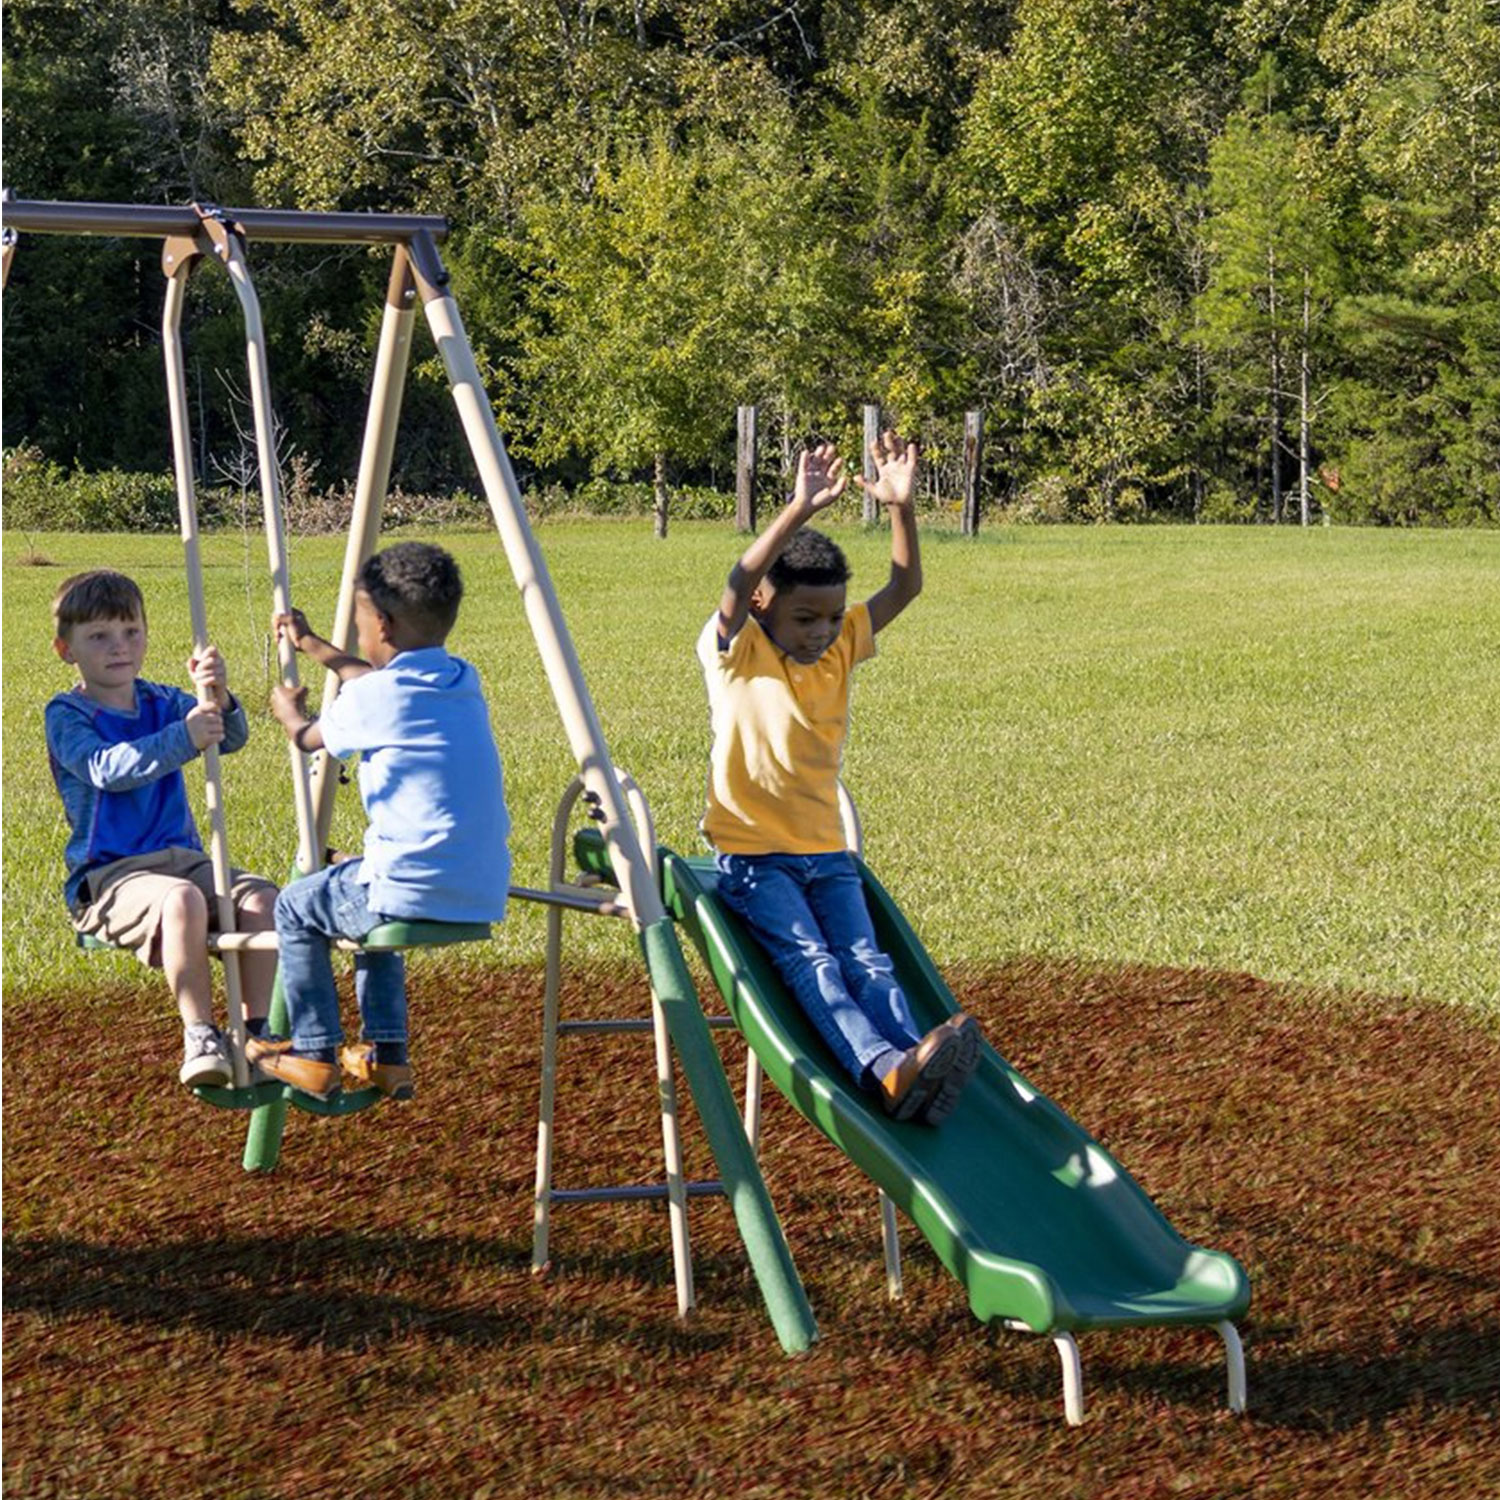 Crestview Swing Set by XDP Recreation with 2 Swing Seats, Stand R Swing, Wave Slide, Fun Glider, & See Saw - image 4 of 7